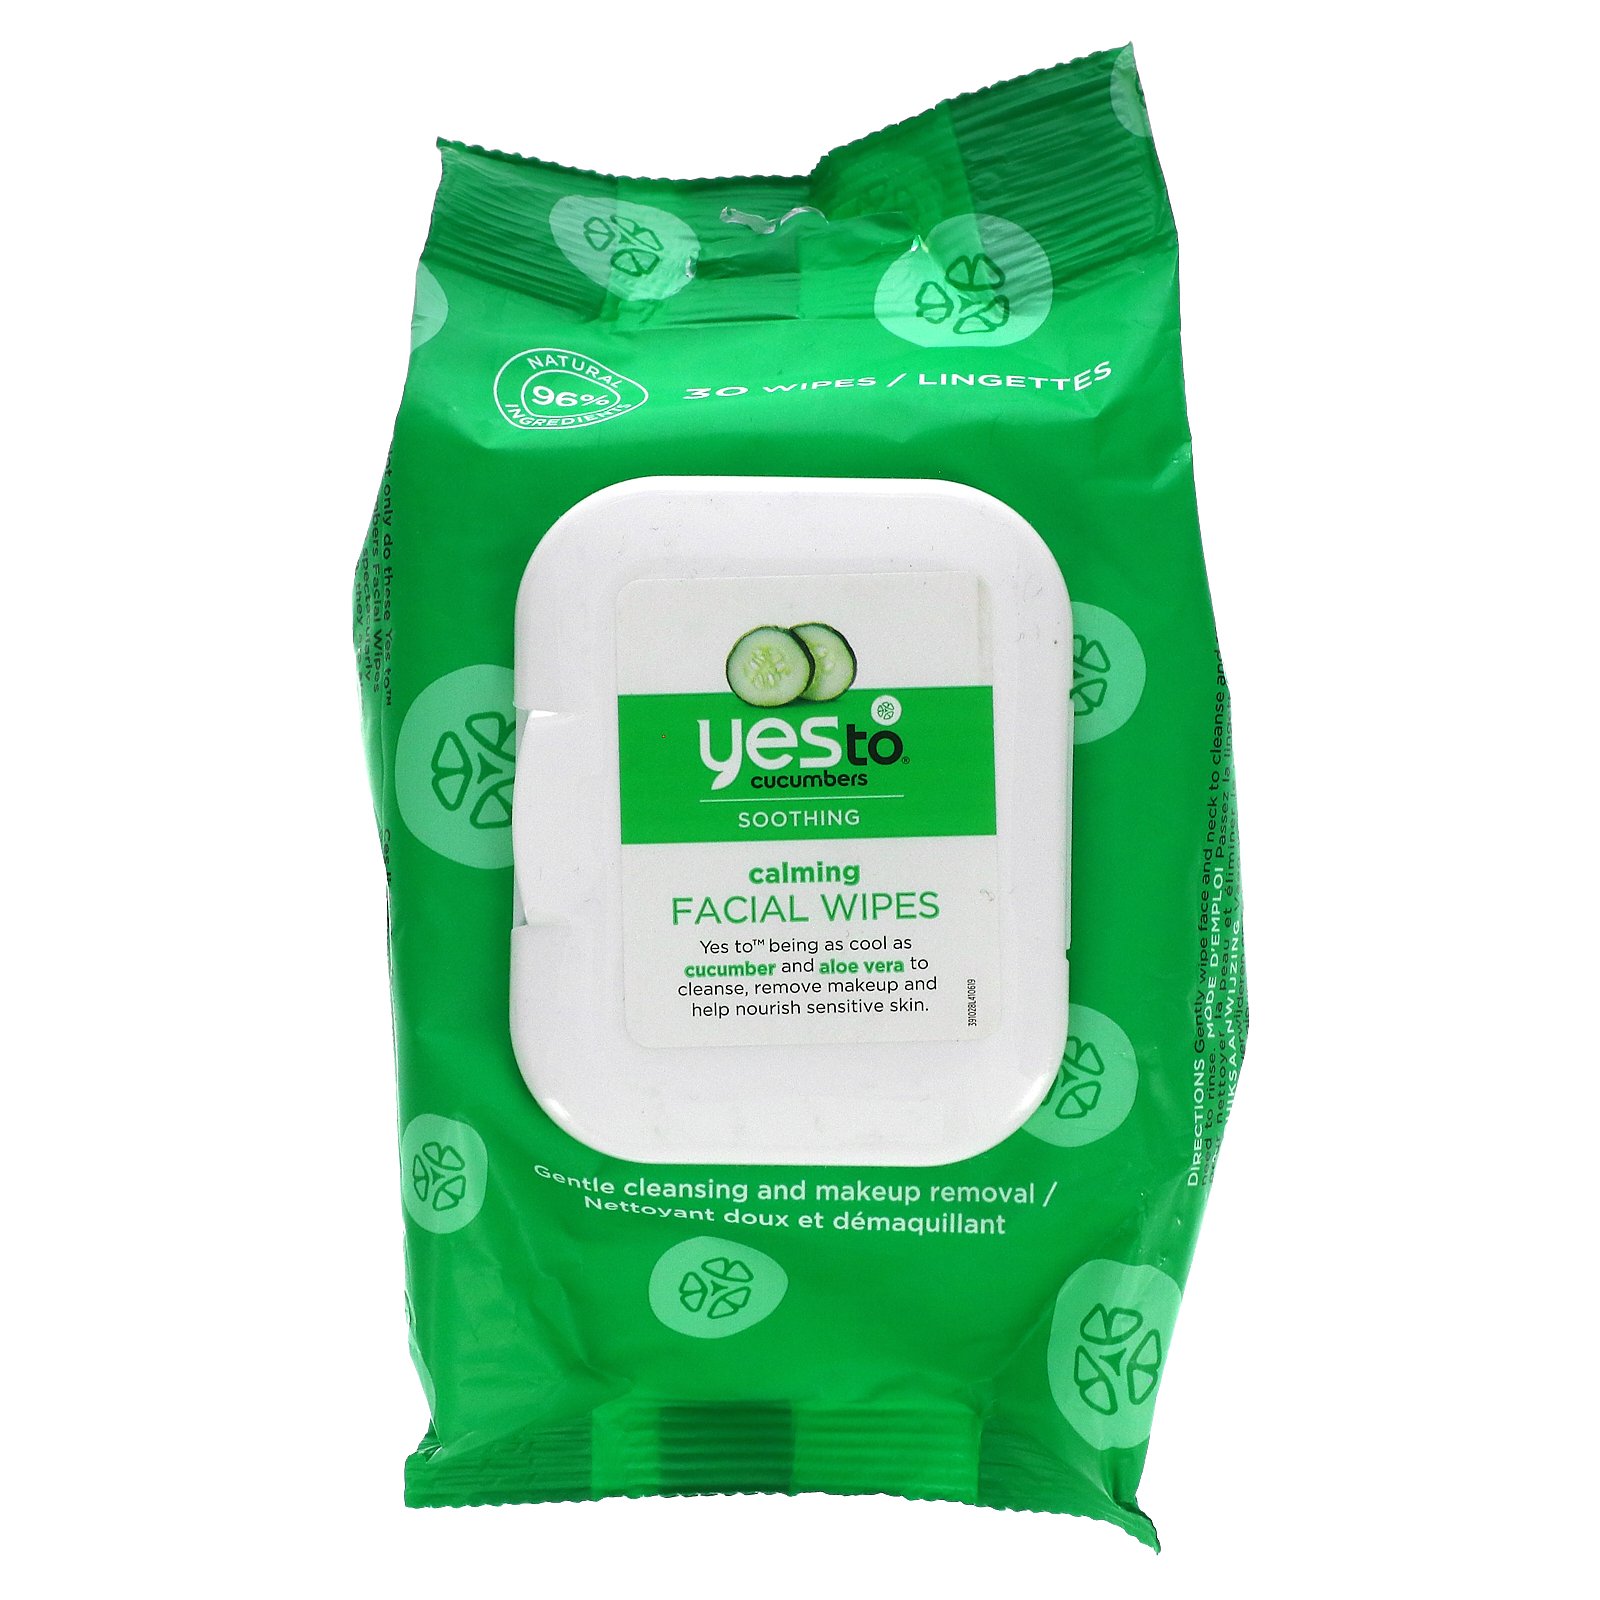 Yes to, Calming Facial Wipes, Cucumbers, 30 Wipes